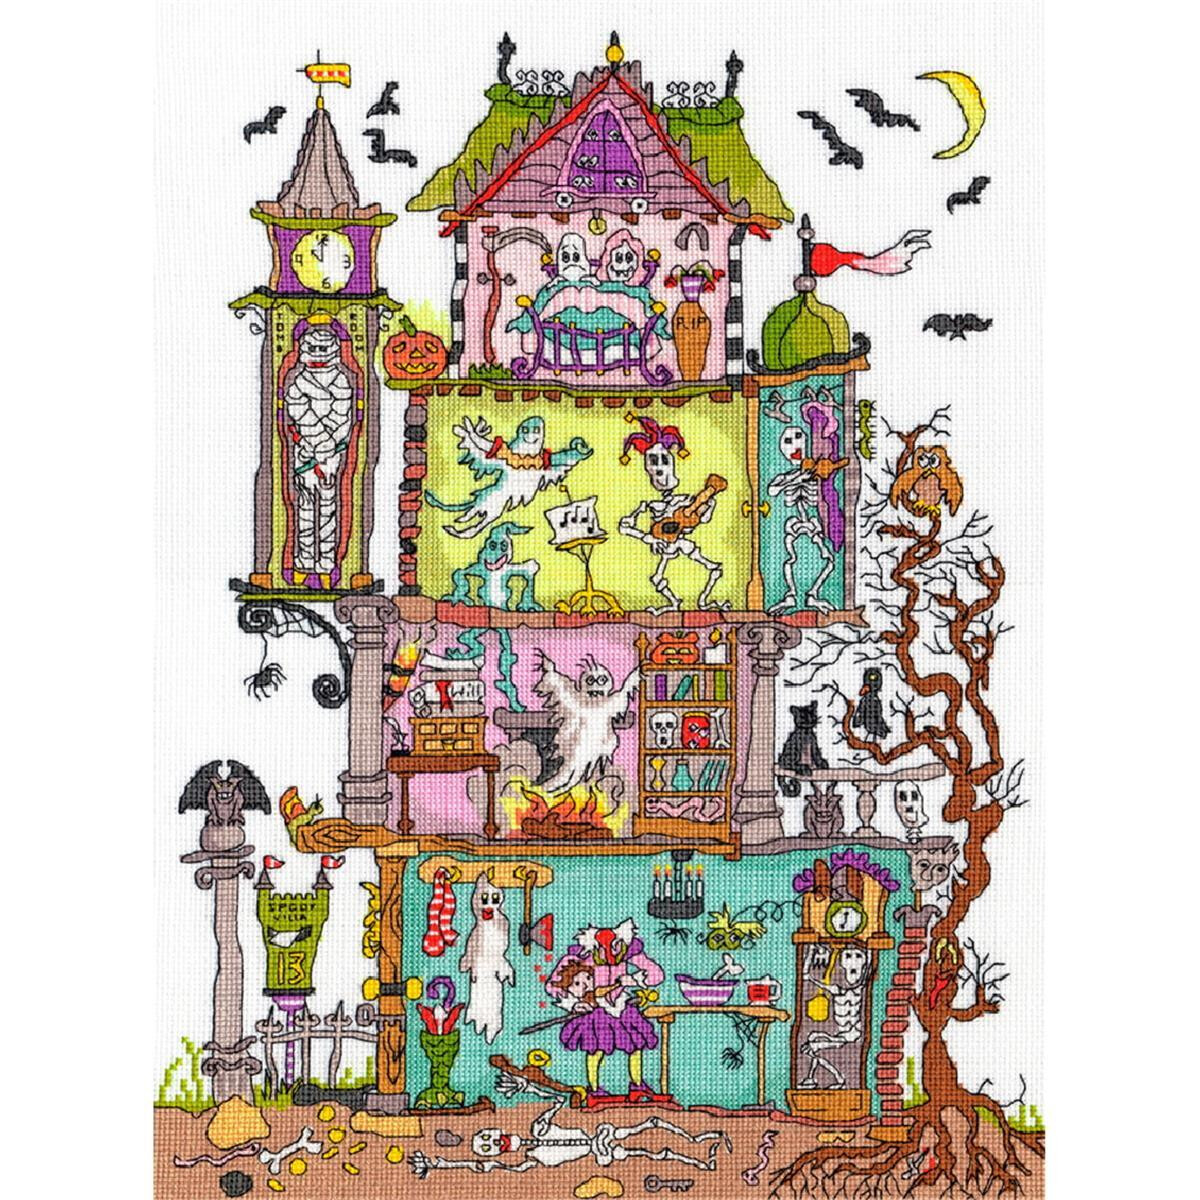 A colorful and spooky embroidery pack from Bothy Threads...